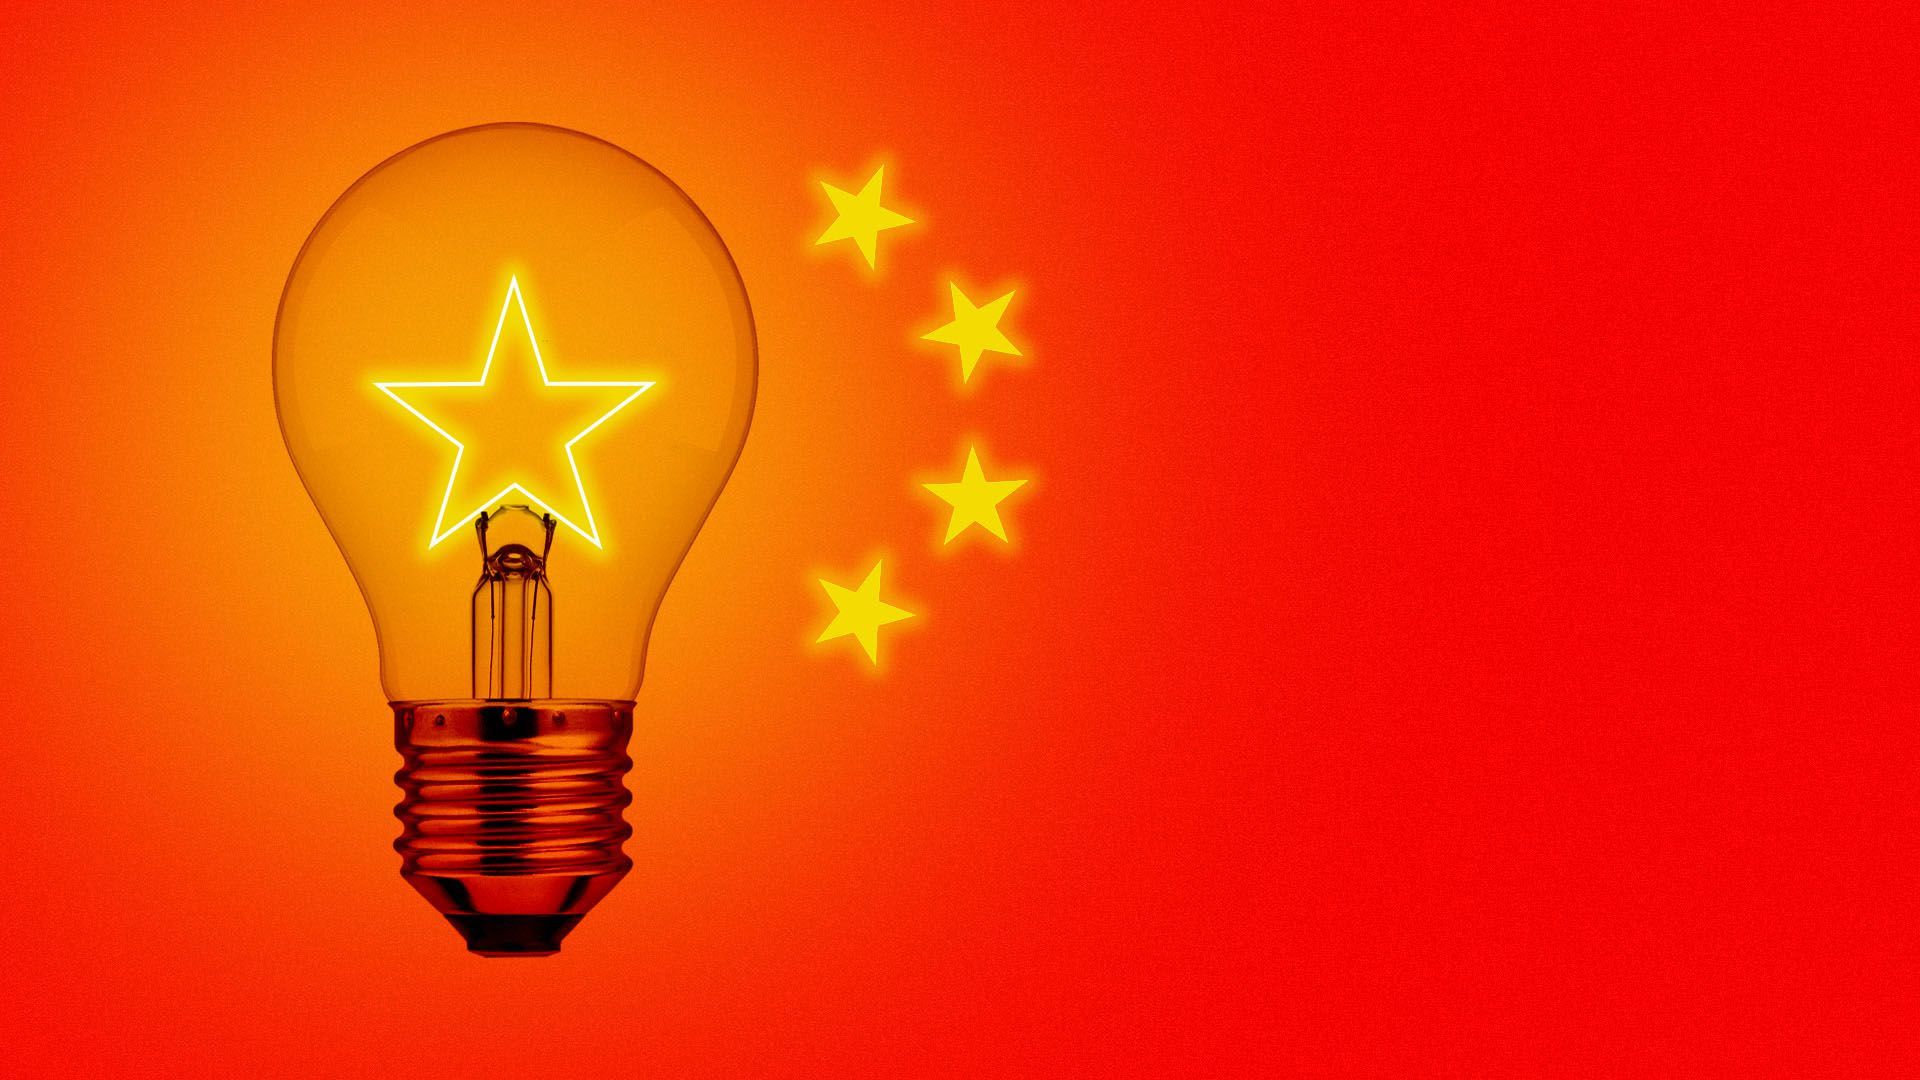 An illustration of a lightbulb with the stars of the chinese flag